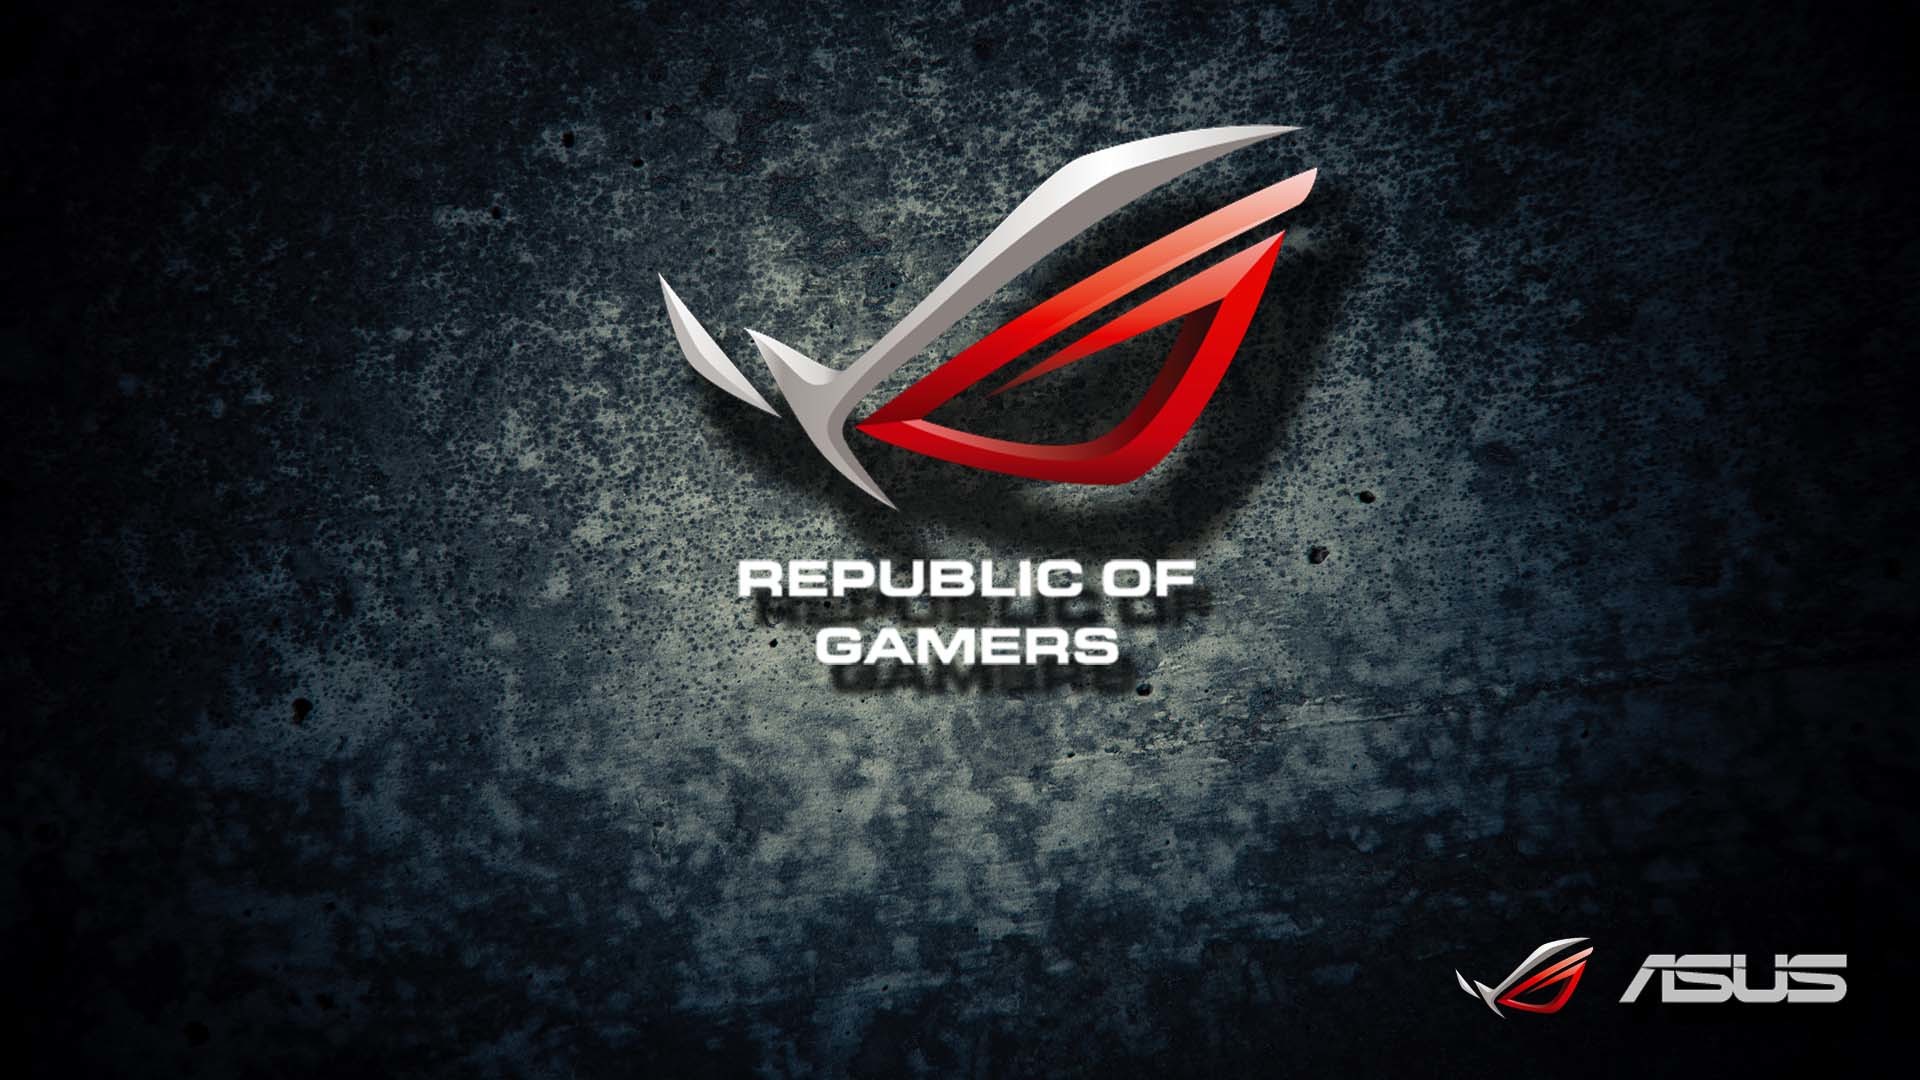 Wallpaper Competition: Vote For Your Favorite – Republic of Gamers